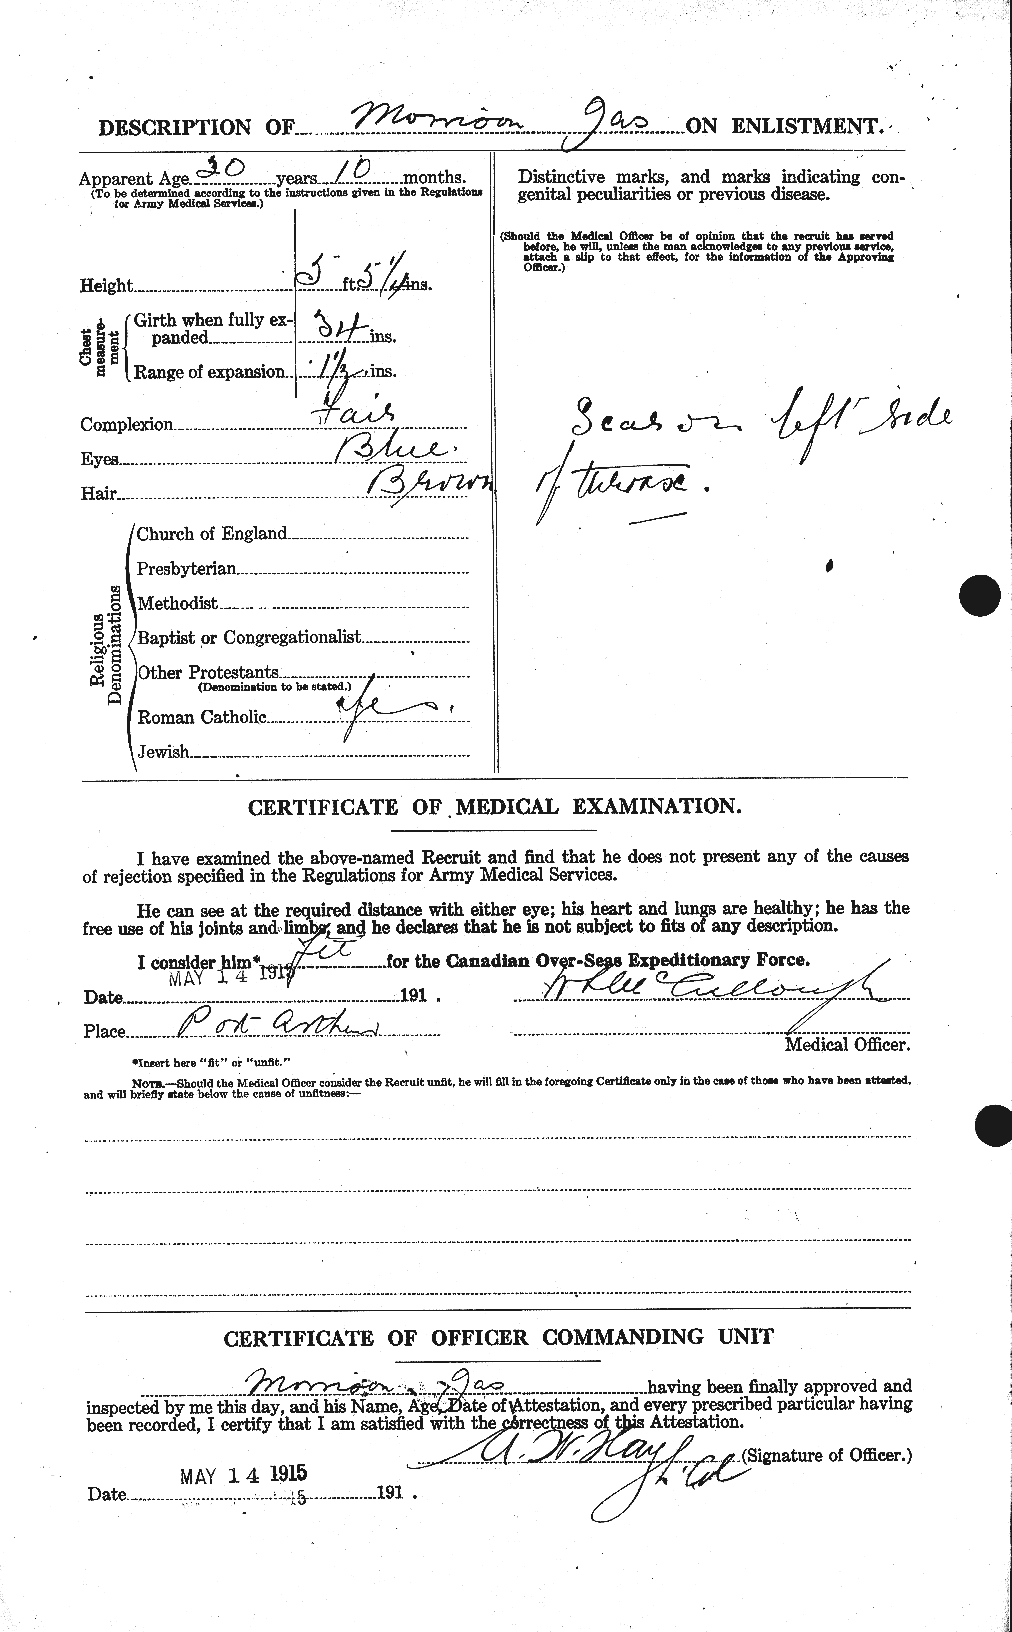 Personnel Records of the First World War - CEF 506898b